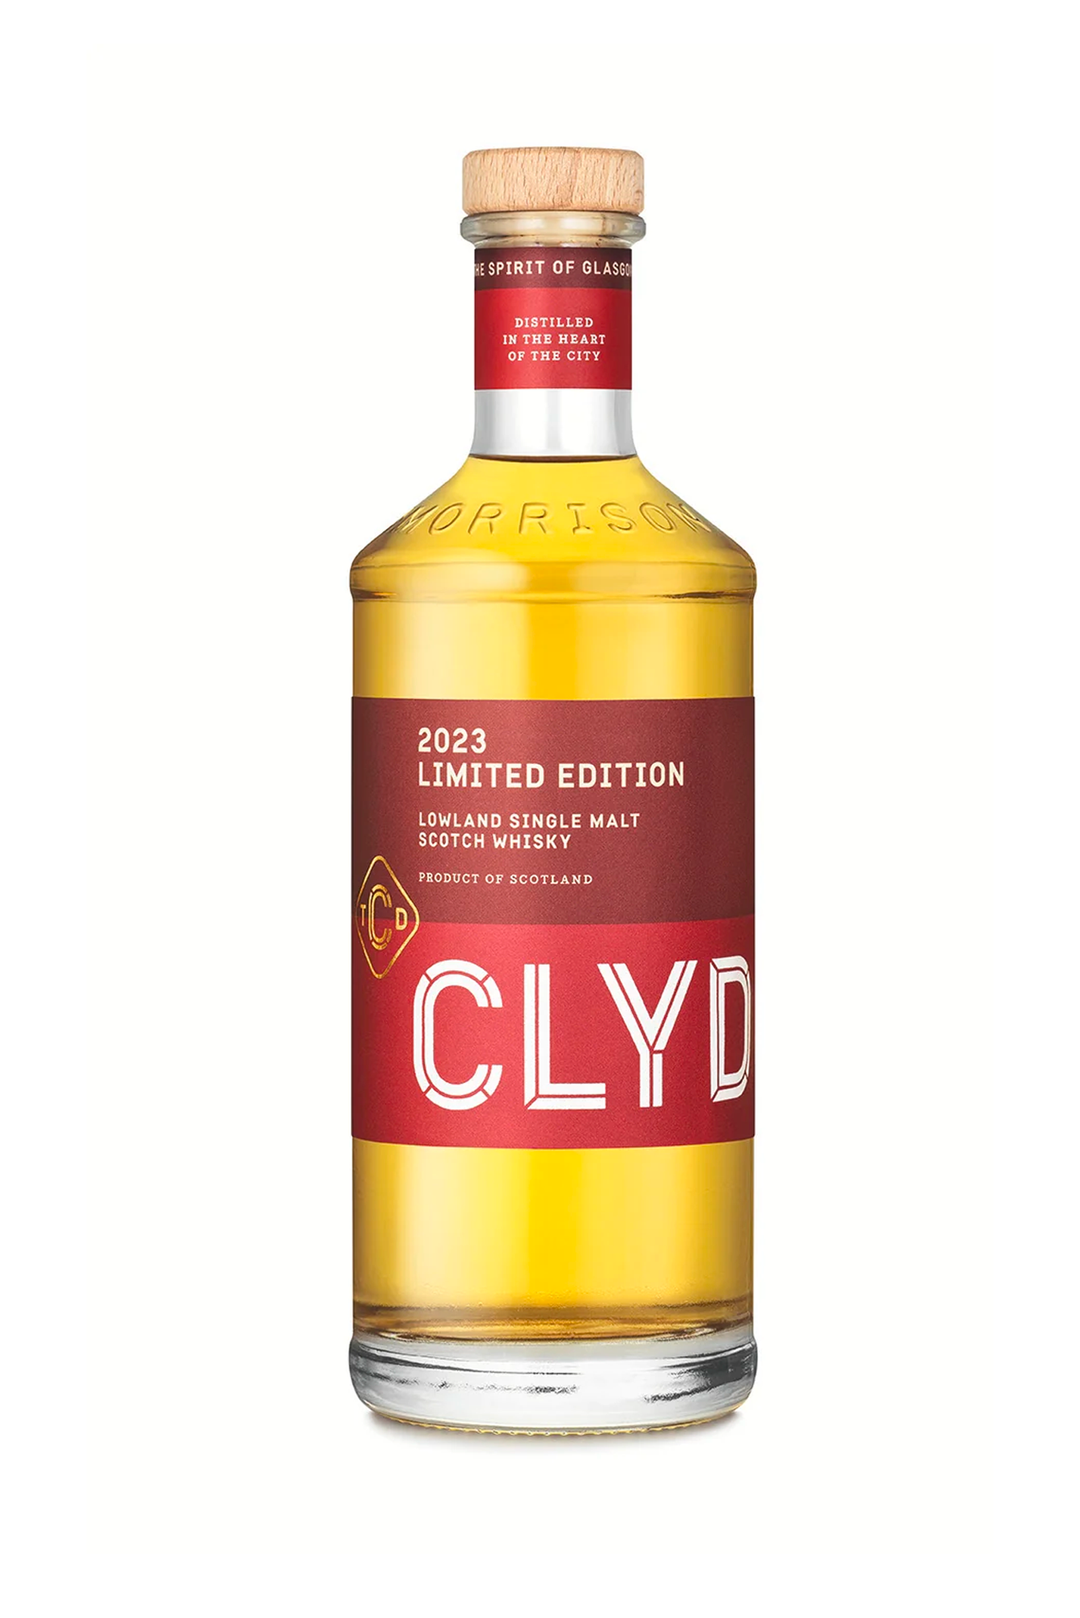 The Clydeside Distillery 2023 Limited Edition